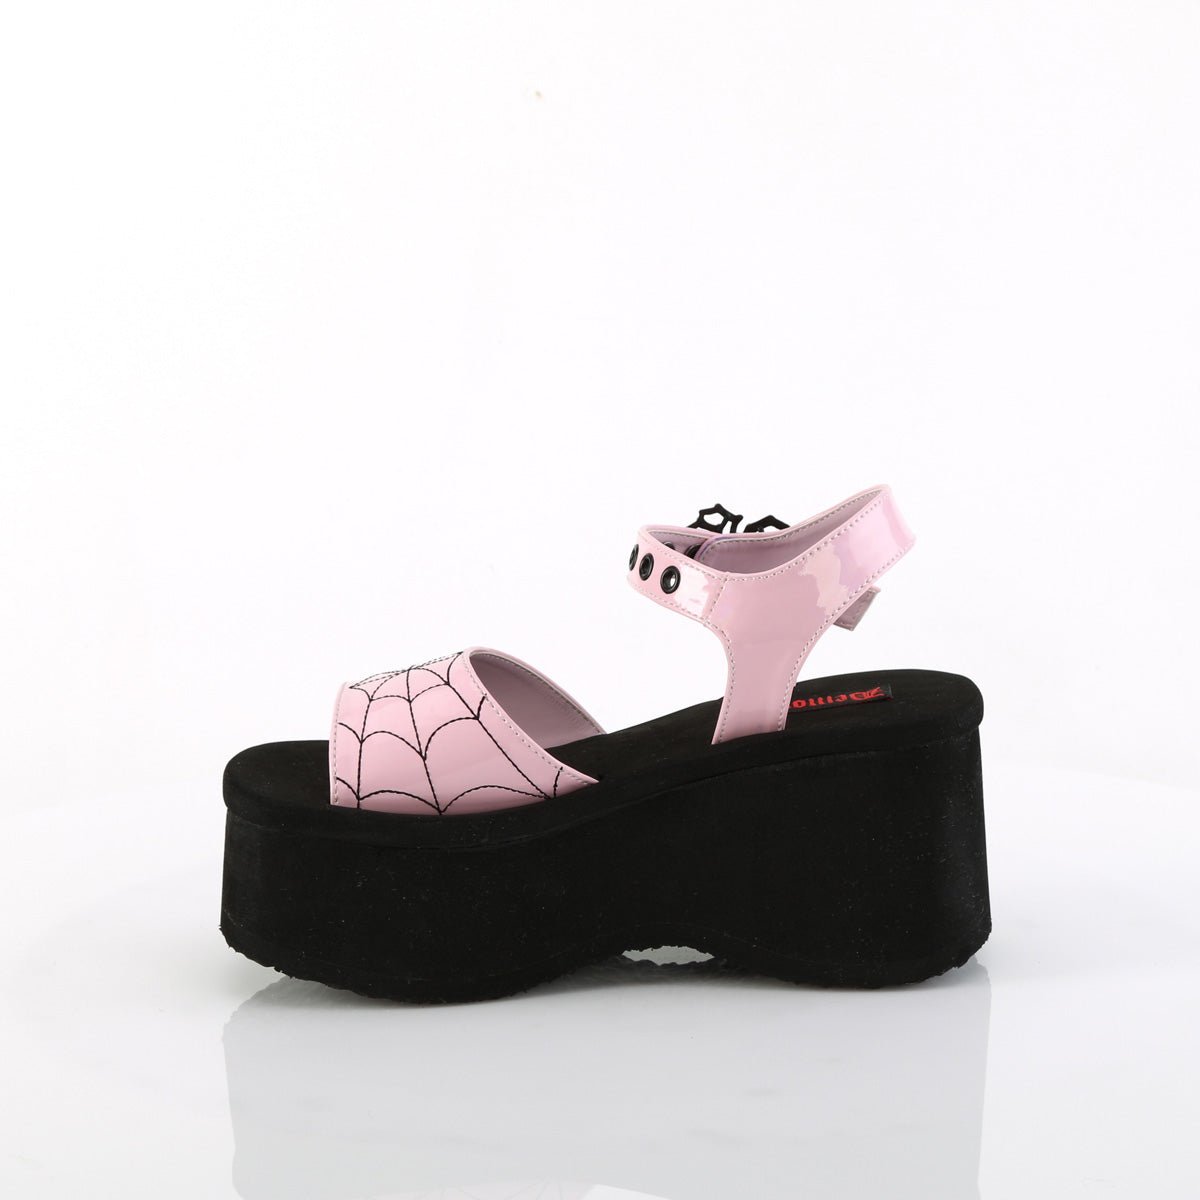 Too Fast | Demonia FUNN-10 Baby Pink Holographic Patent Leather Platforms